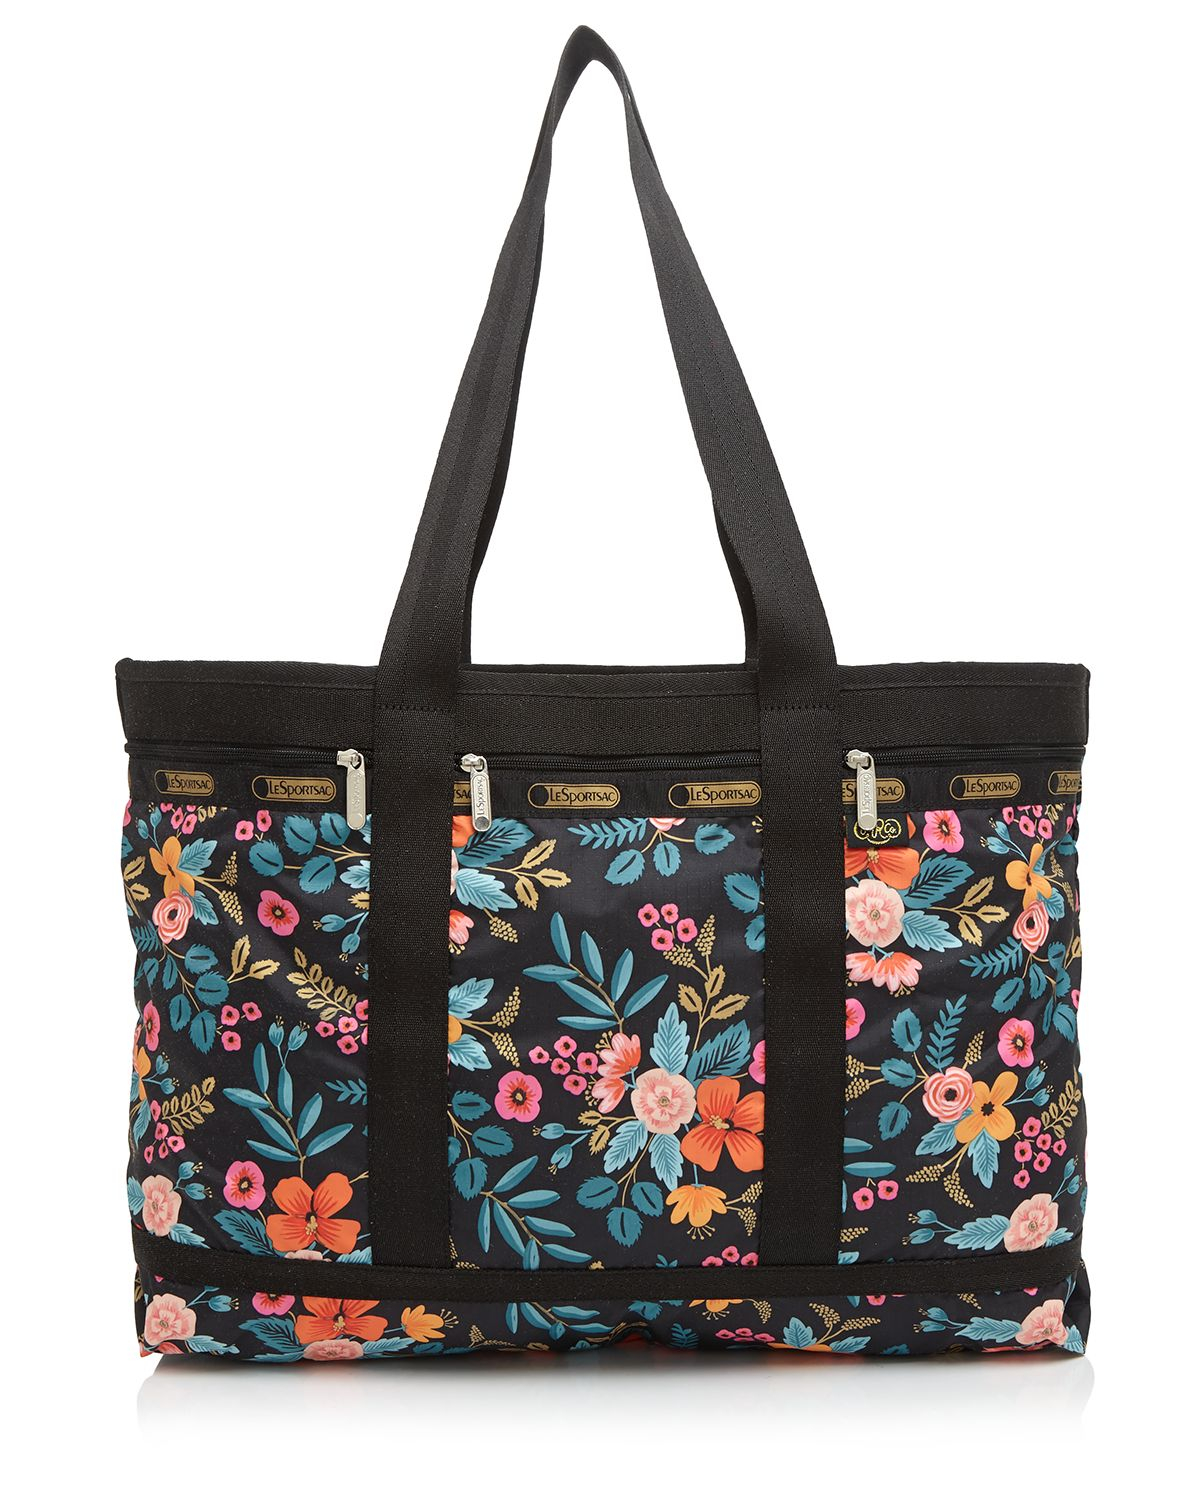 Lyst - Lesportsac Tote - Travel